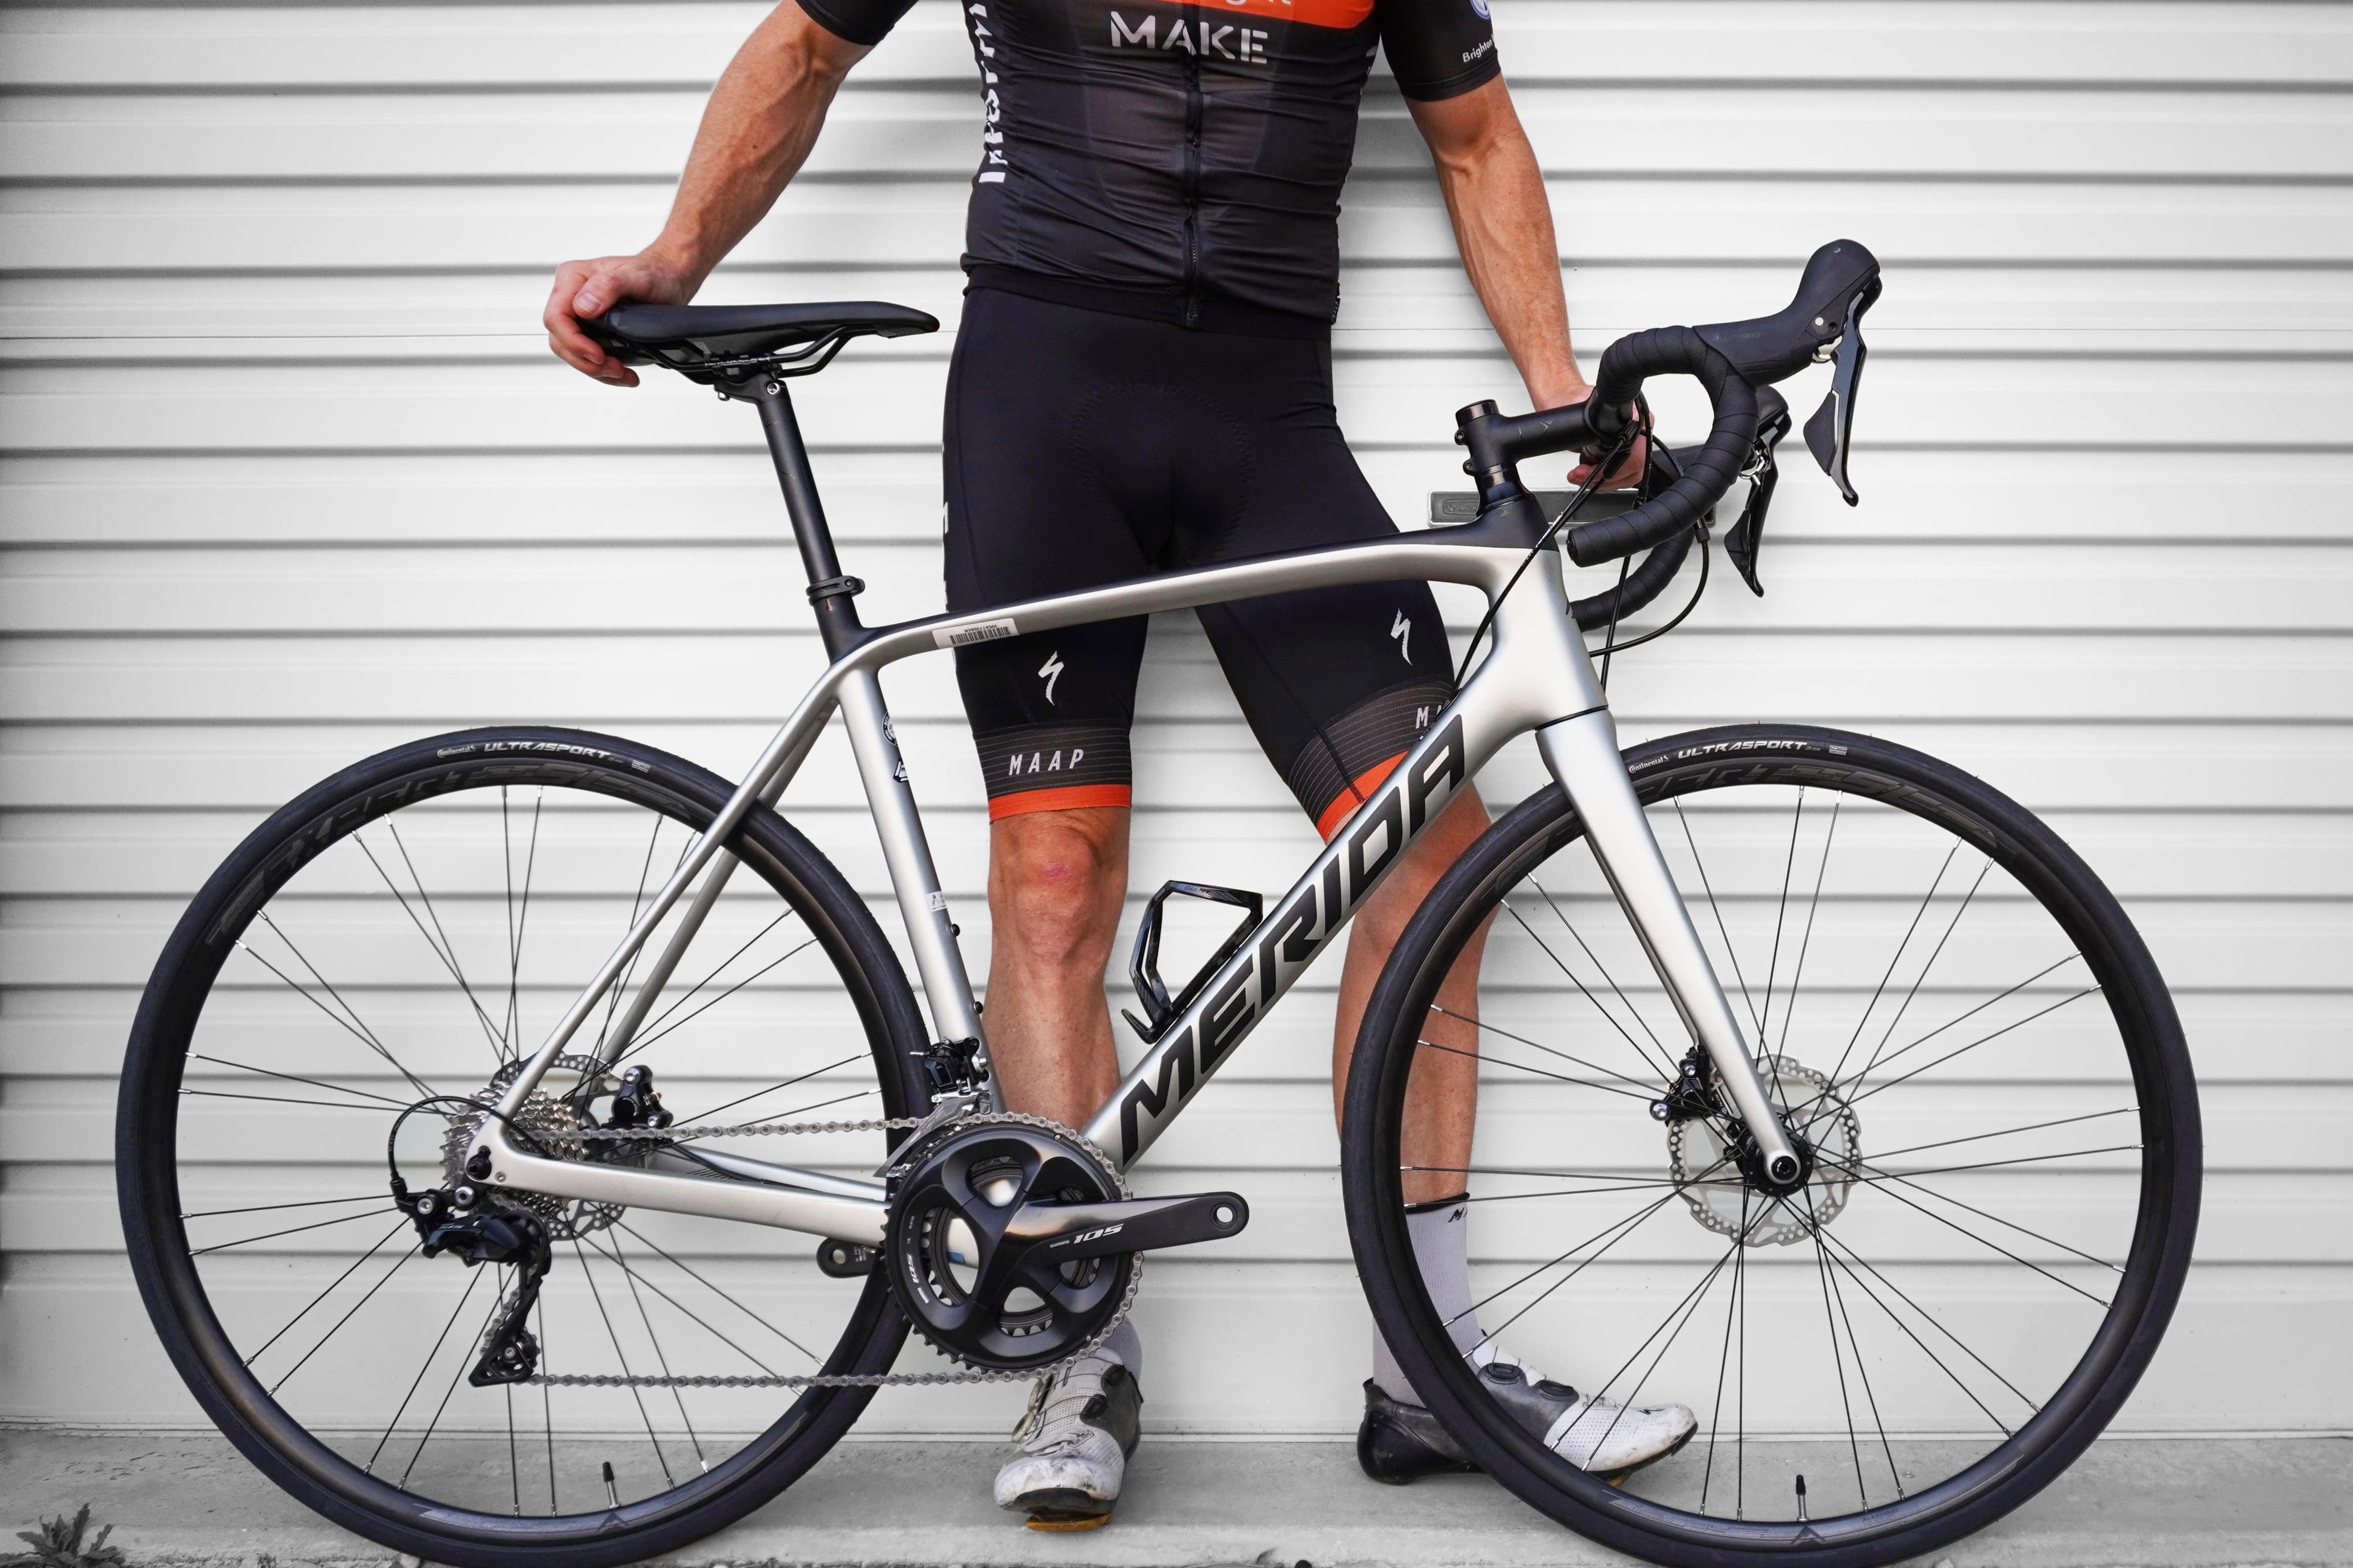 WIN a Road Bike Valued at $2,899 (or take the cash!)